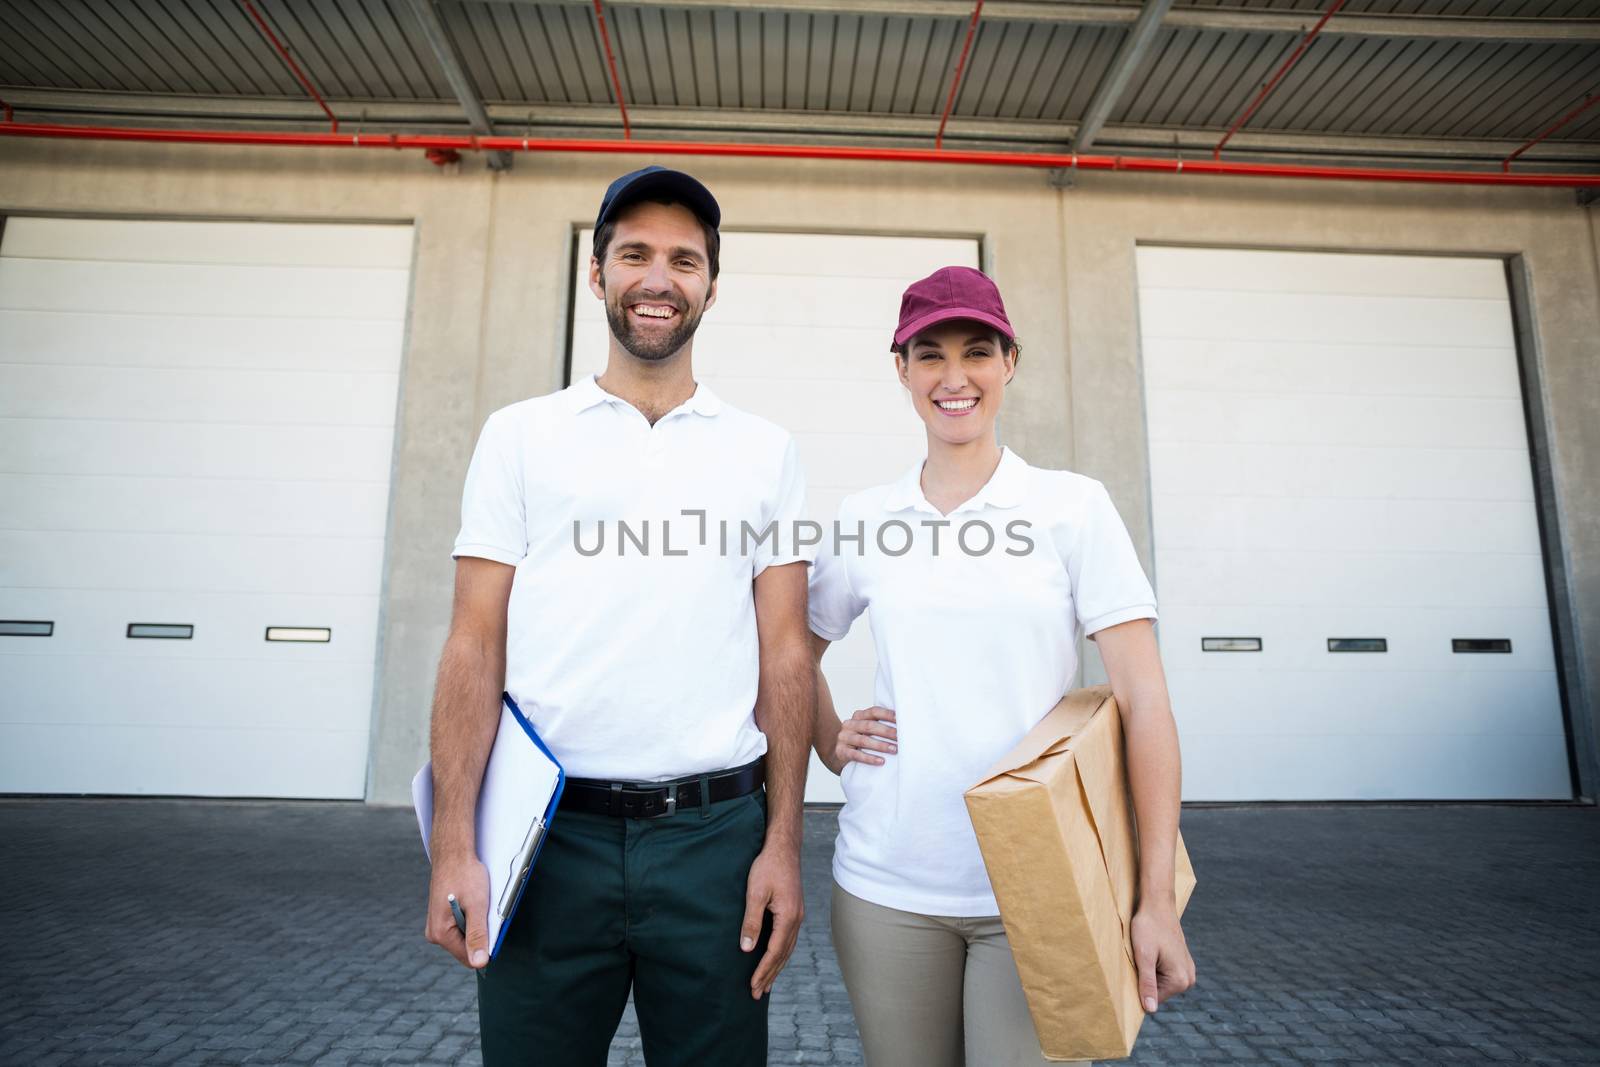 Delivery people are posing and smiling by Wavebreakmedia